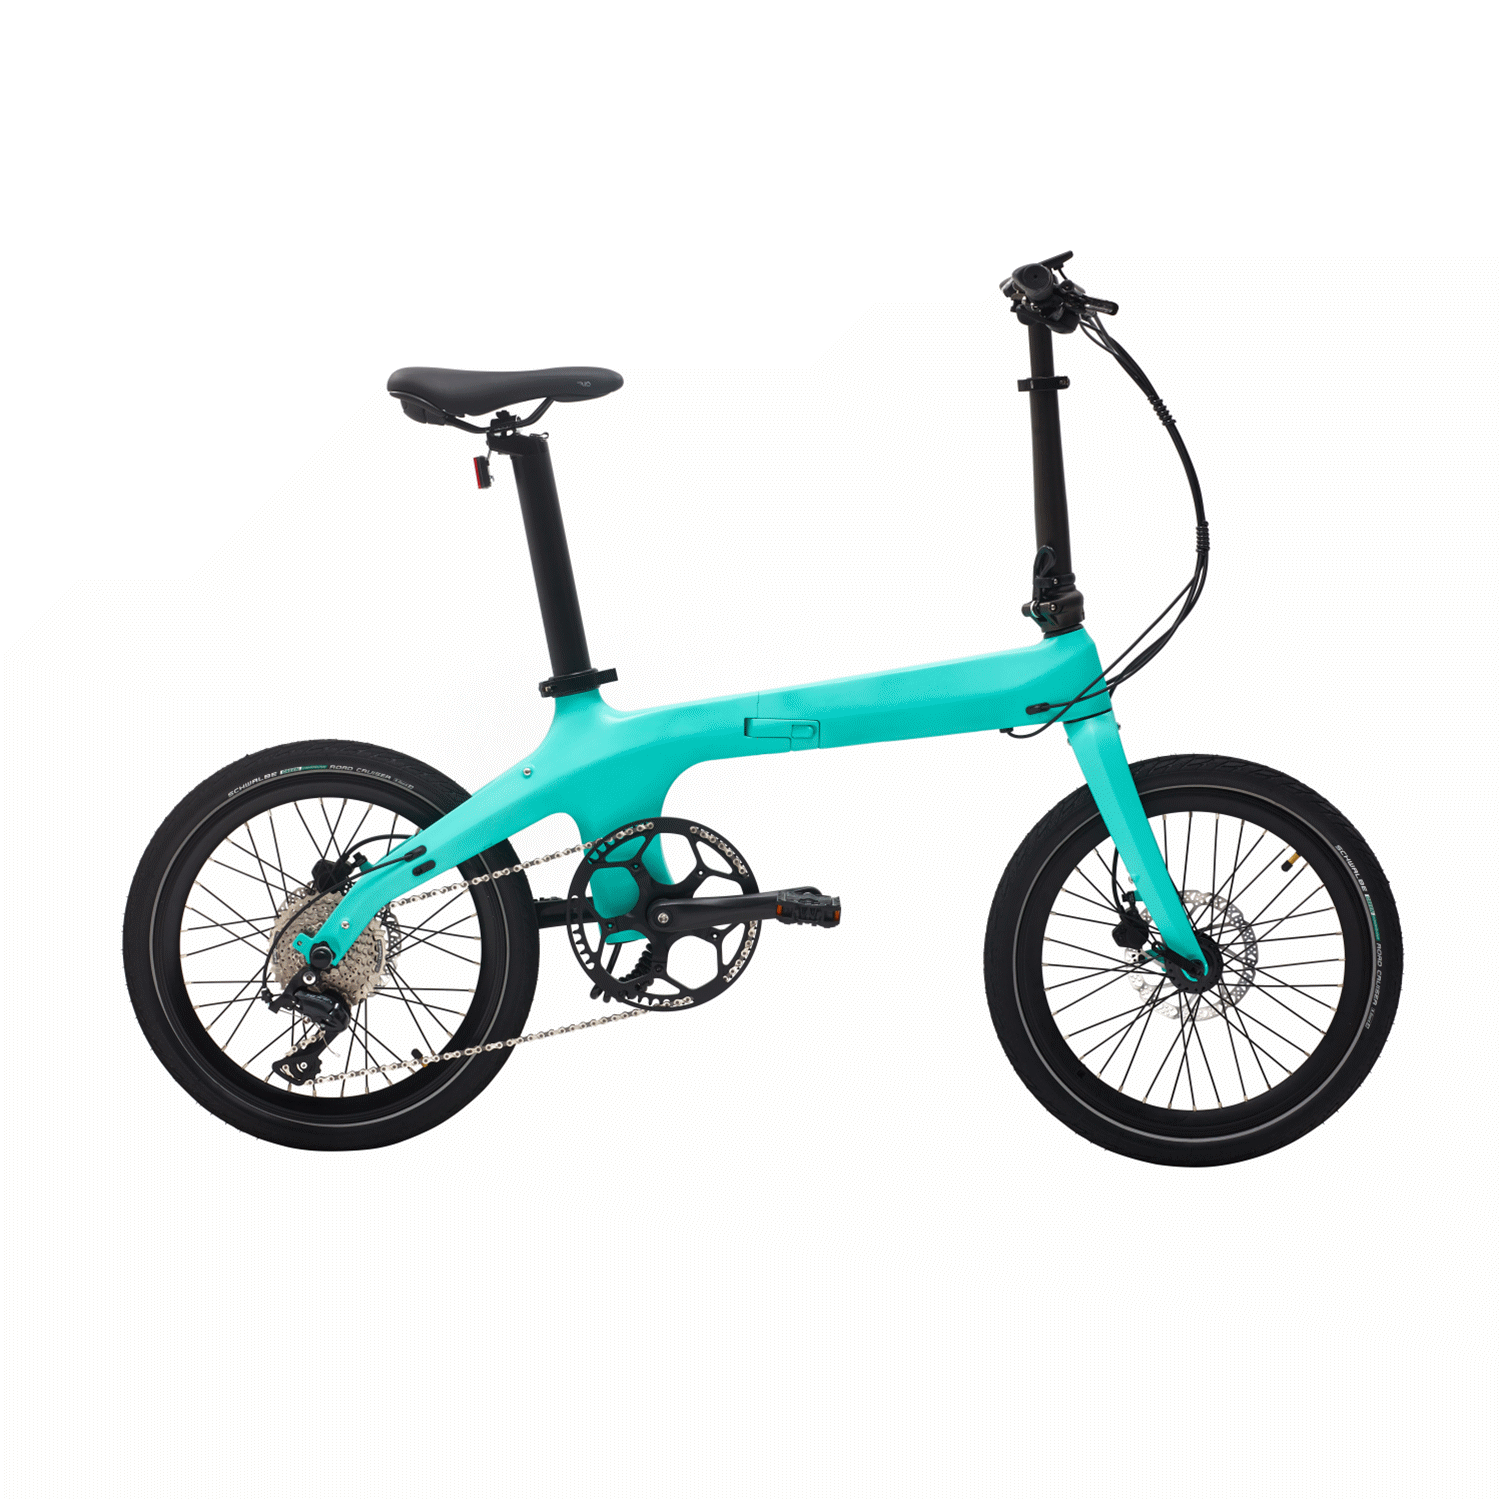 This new carbon fiber electric bike costs $999 - Blog - 9